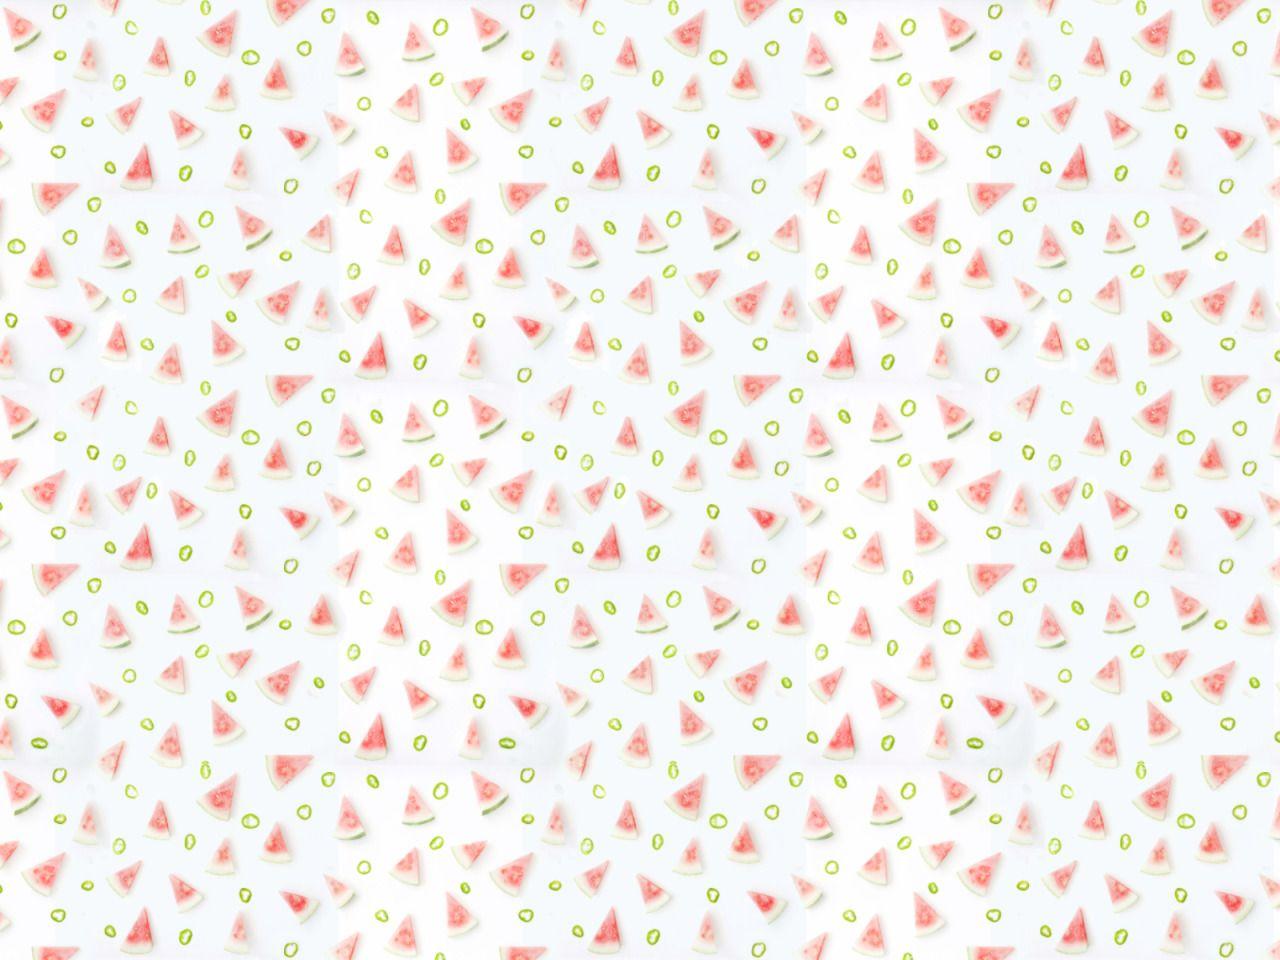 pattern background tumblr 2. Background Check All